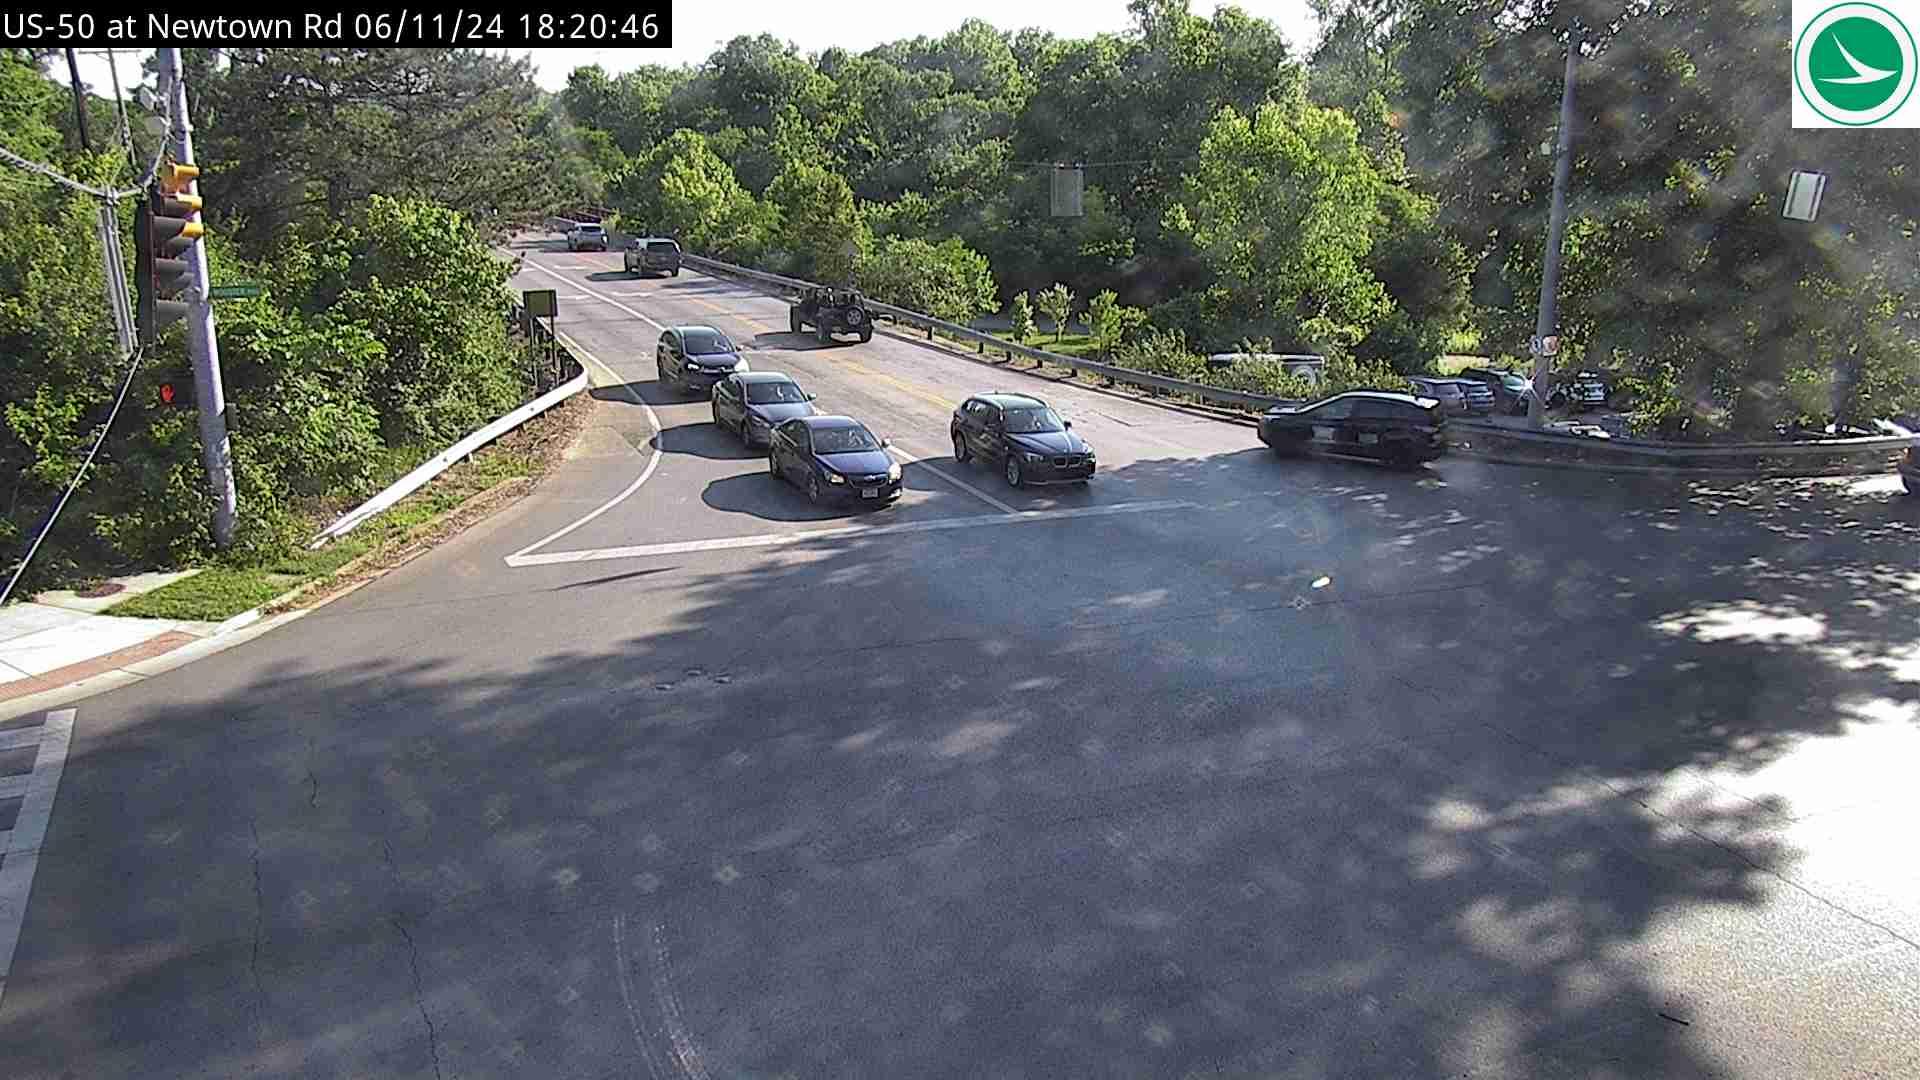 Traffic Cam Plainville: US-50 at Newtown Rd